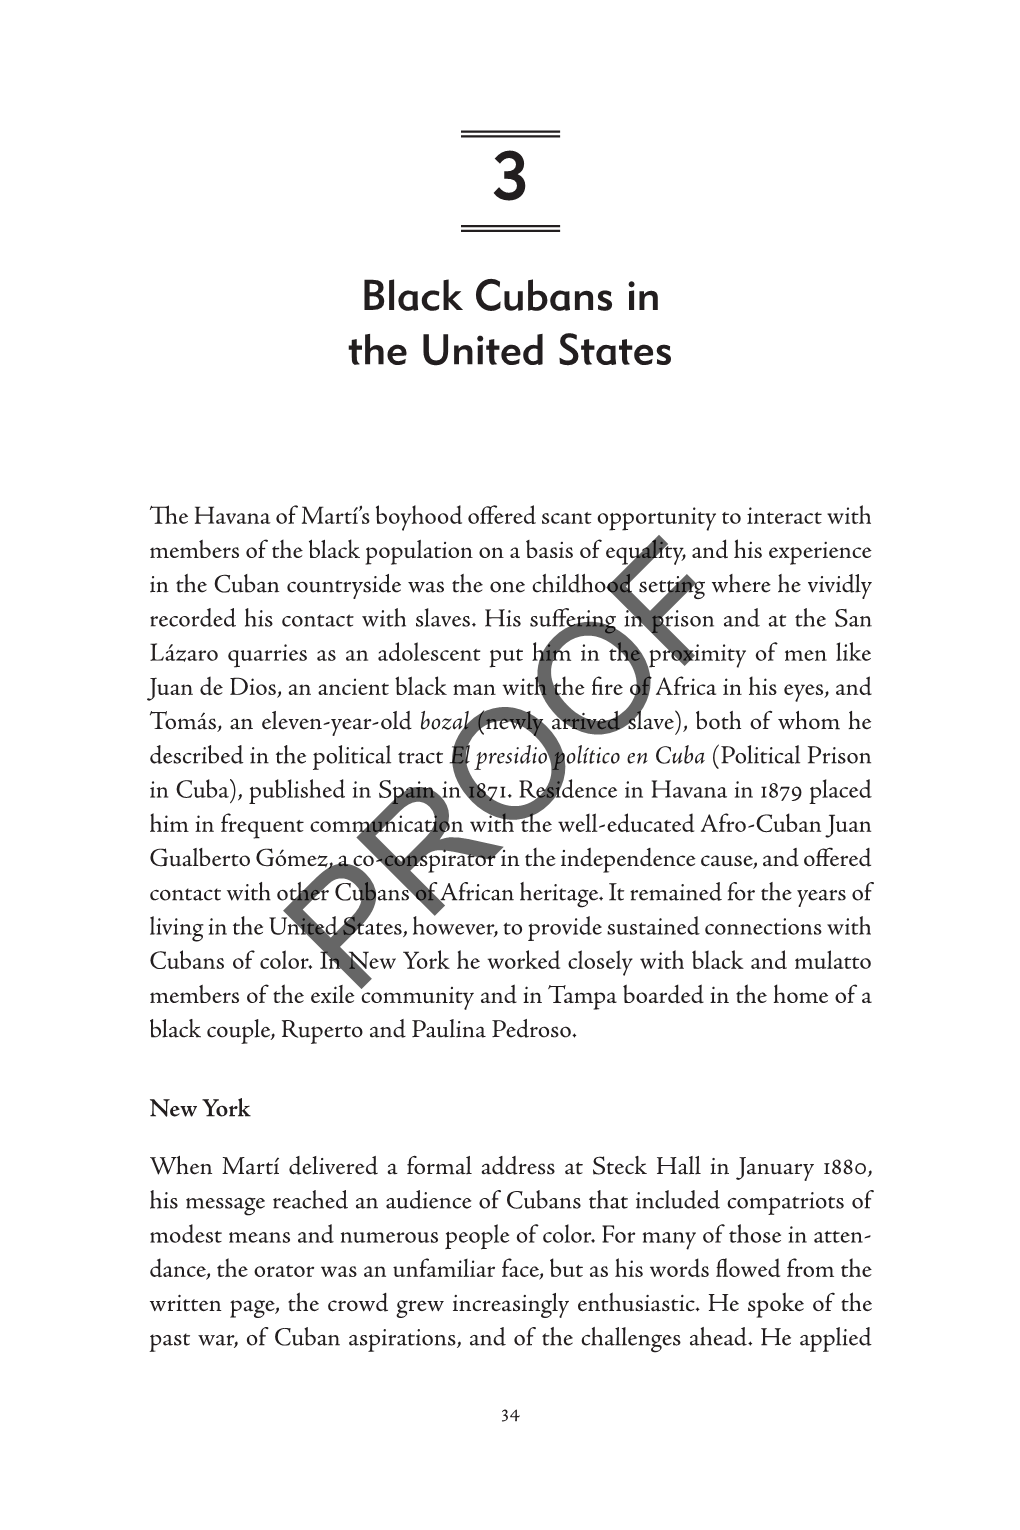 Black Cubans in the United States